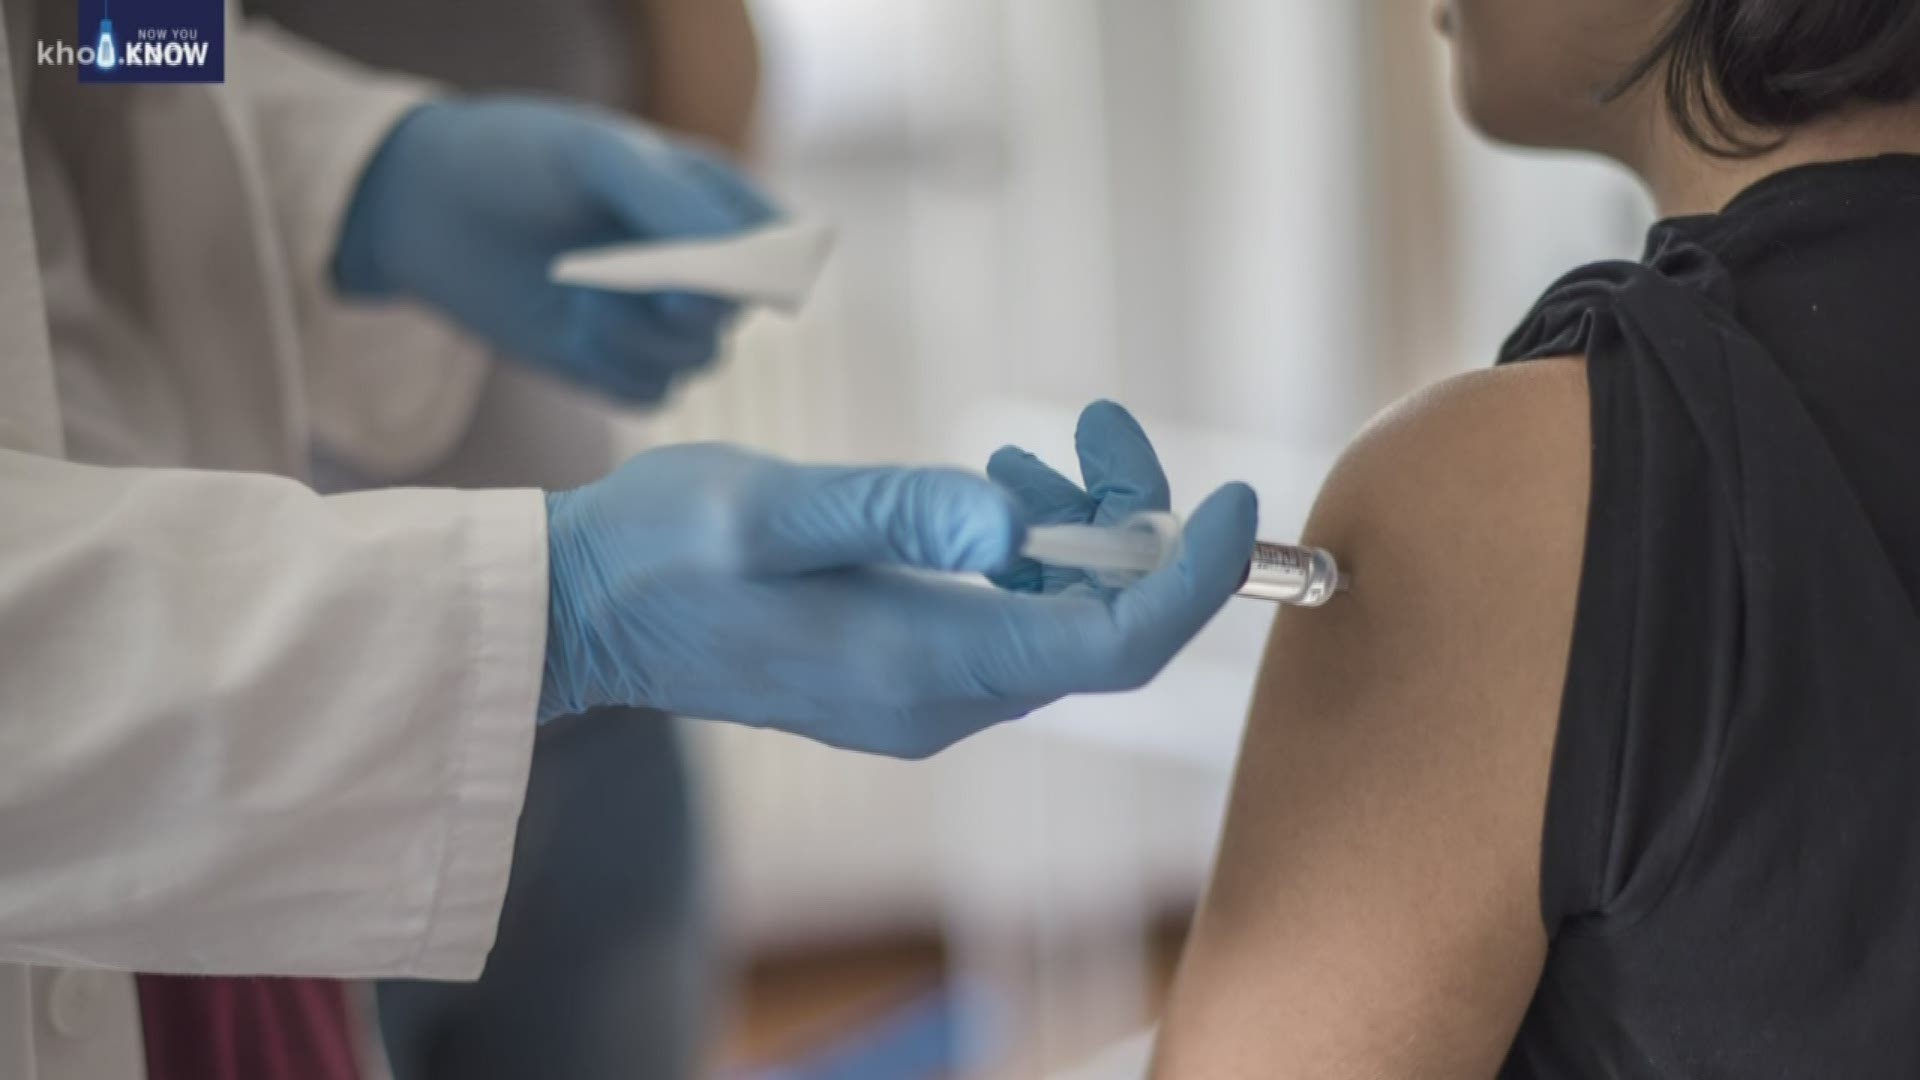 The number of measles cases in the U.S. is at its highest level in 25 years. And even if you've had the vaccine, you might not be as protected as you think.